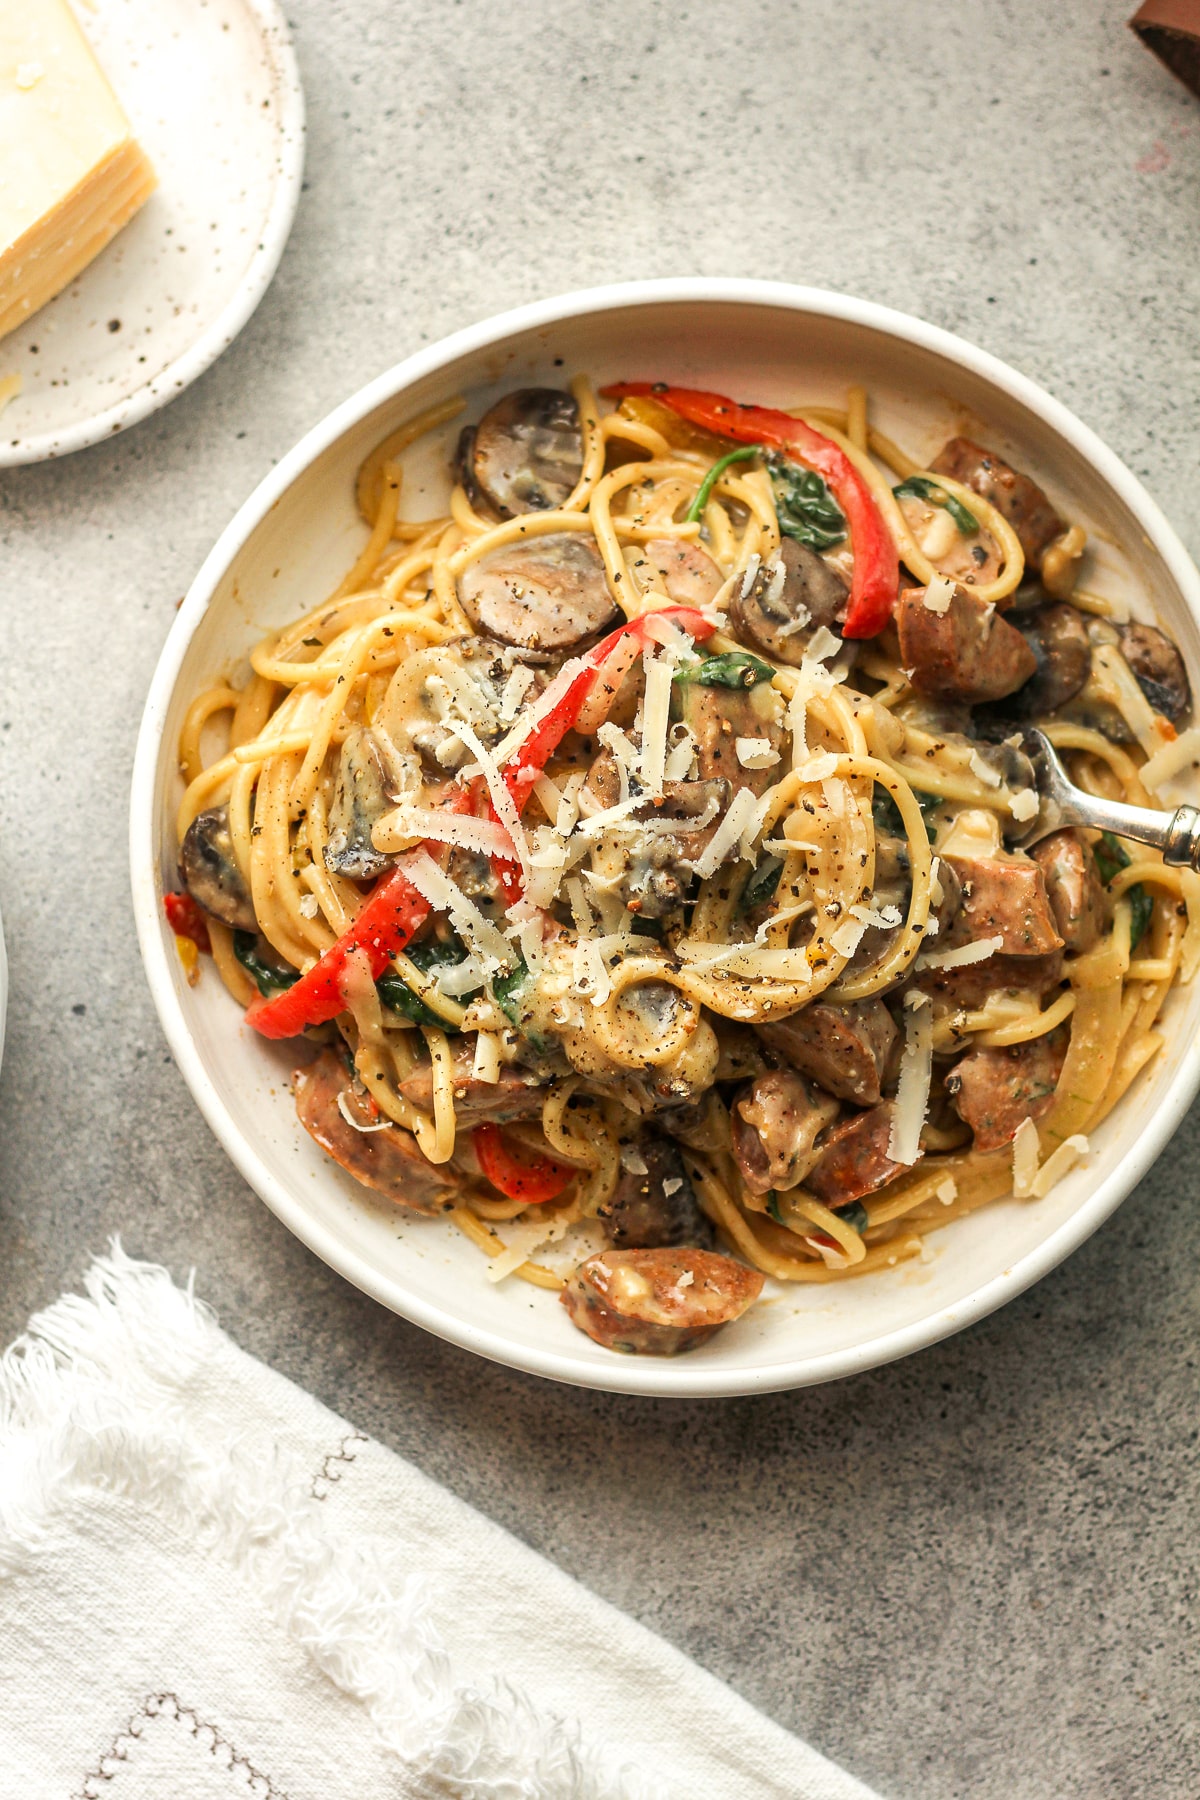 A bowl of cajun chicken sausage pasta with peppers and mushrooms.